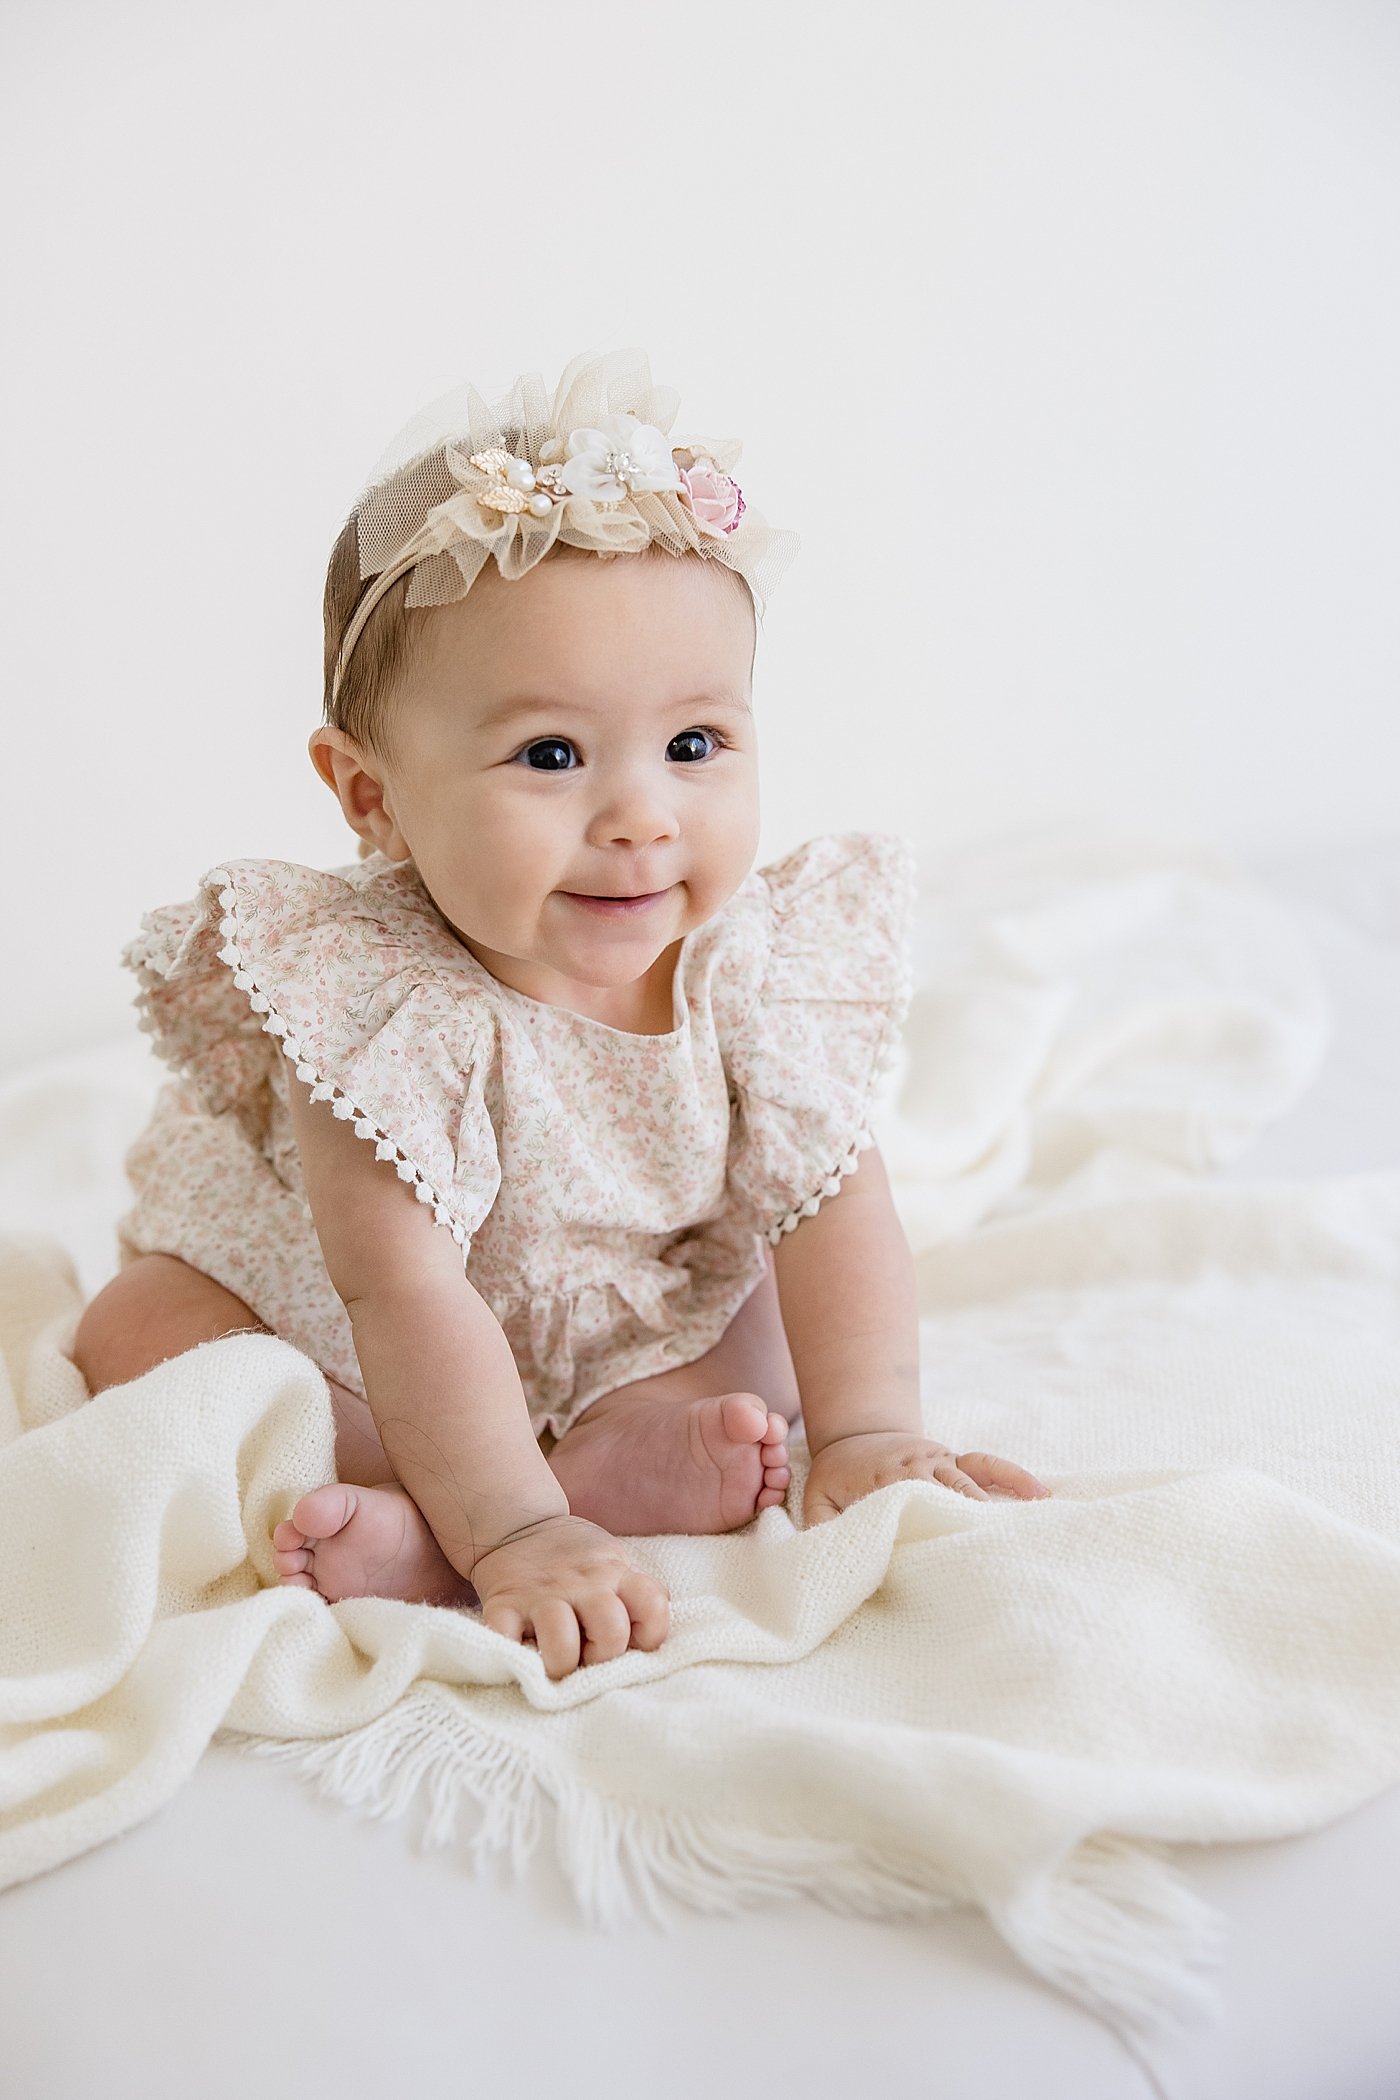 Baby Girl 6 month studio session in Newport Beach | Ambre Williams Photography